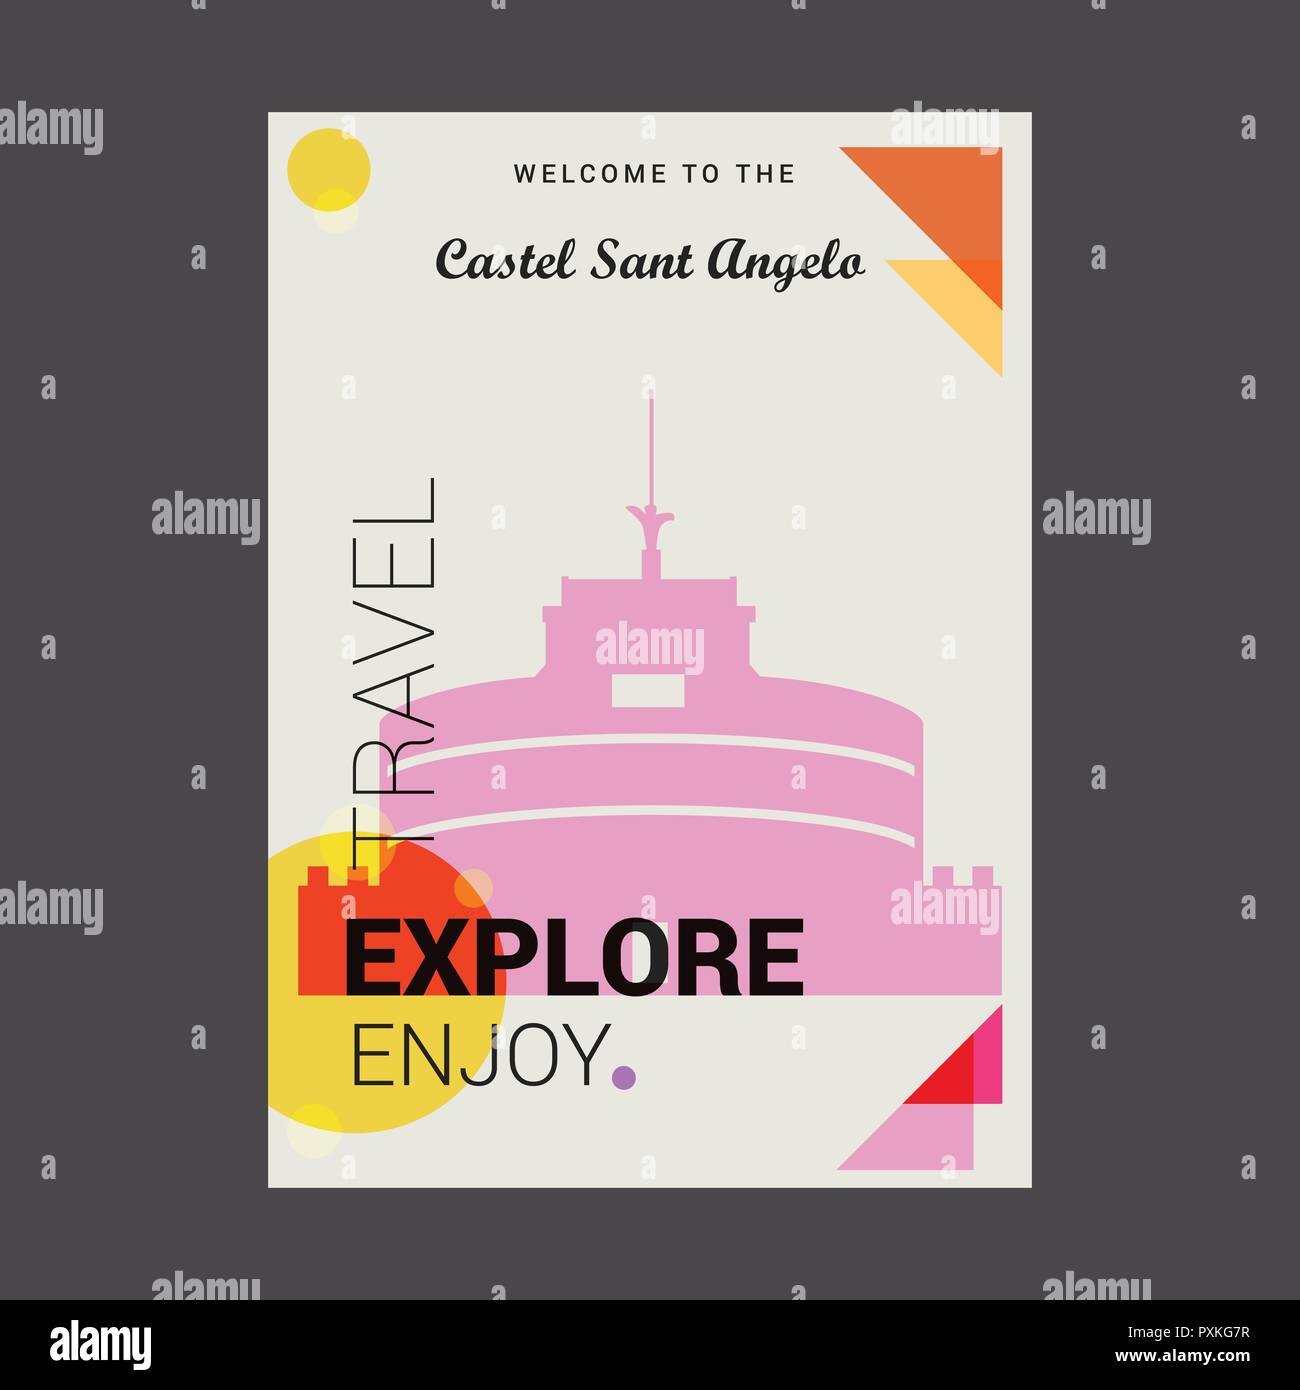 Welcome to The Castel Sant Angelo Rome, Italy. Explore, Travel Enjoy Poster Template Stock Vector